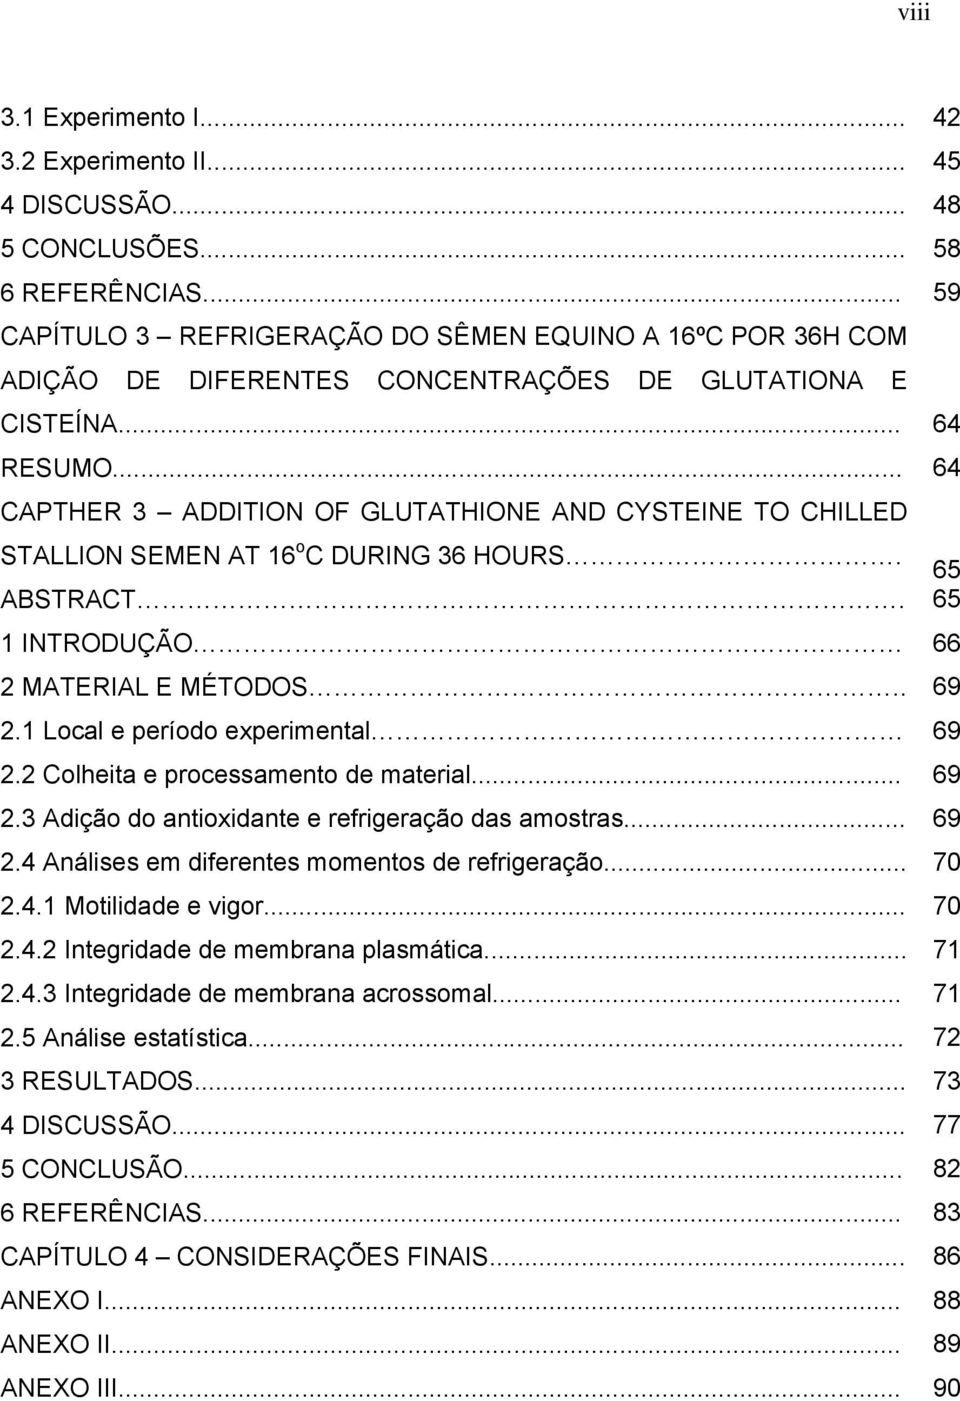 .. 64 CAPTHER 3 ADDITION OF GLUTATHIONE AND CYSTEINE TO CHILLED STALLION SEMEN AT 16 o C DURING 36 HOURS. 65 ABSTRACT. 65 1 INTRODUÇÃO 66 2 MATERIAL E MÉTODOS.. 69 2.